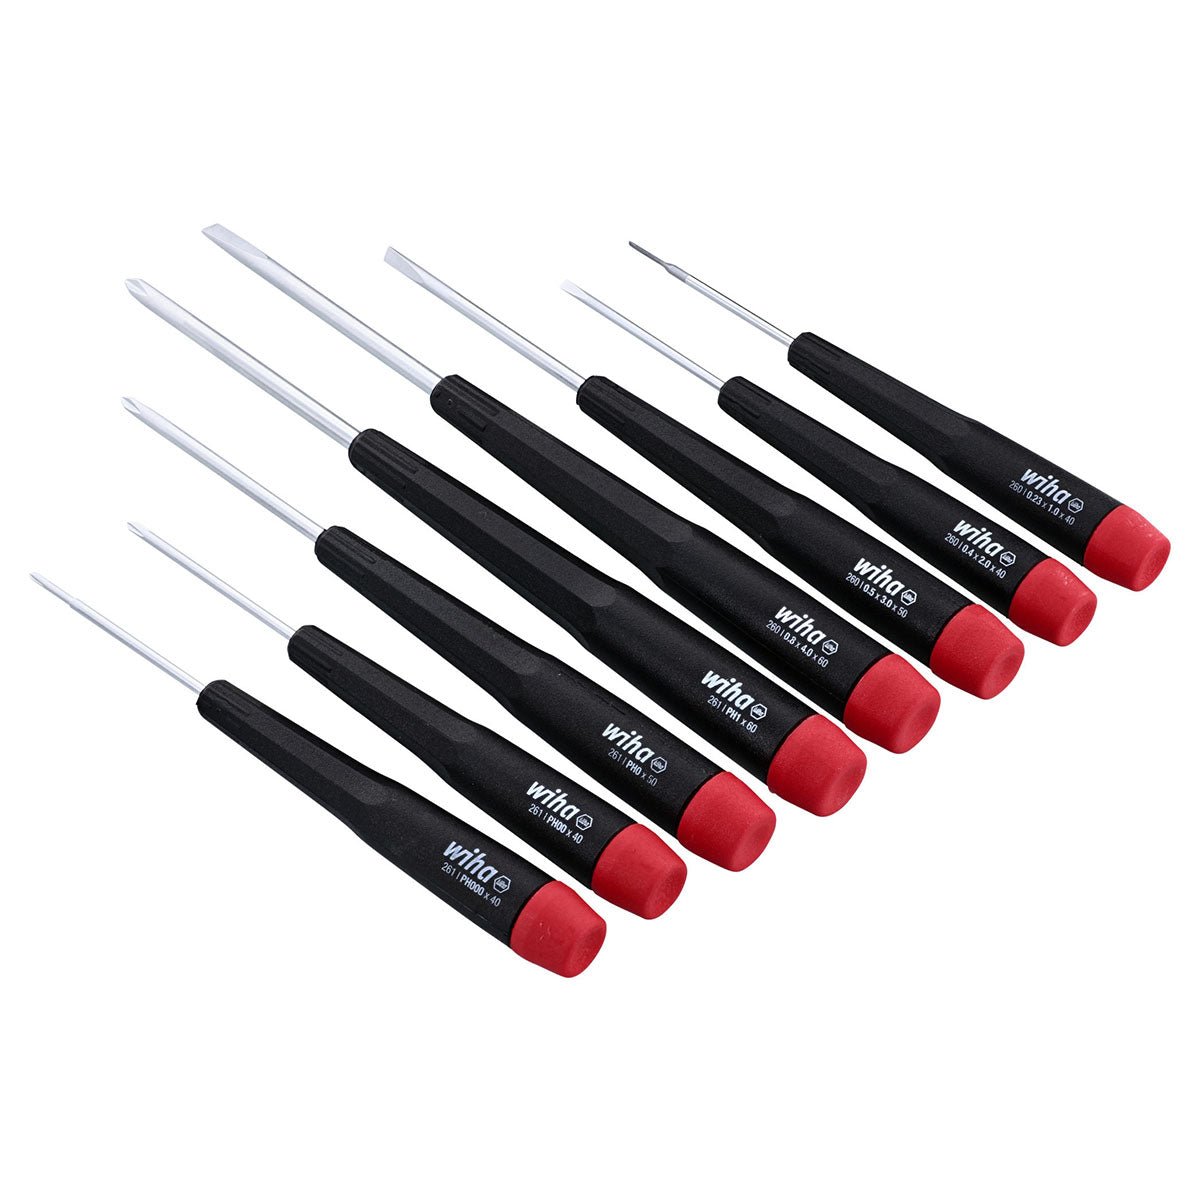 Wiha Precision Slotted And Phillips Screwdriver Set (8 Piece Set)